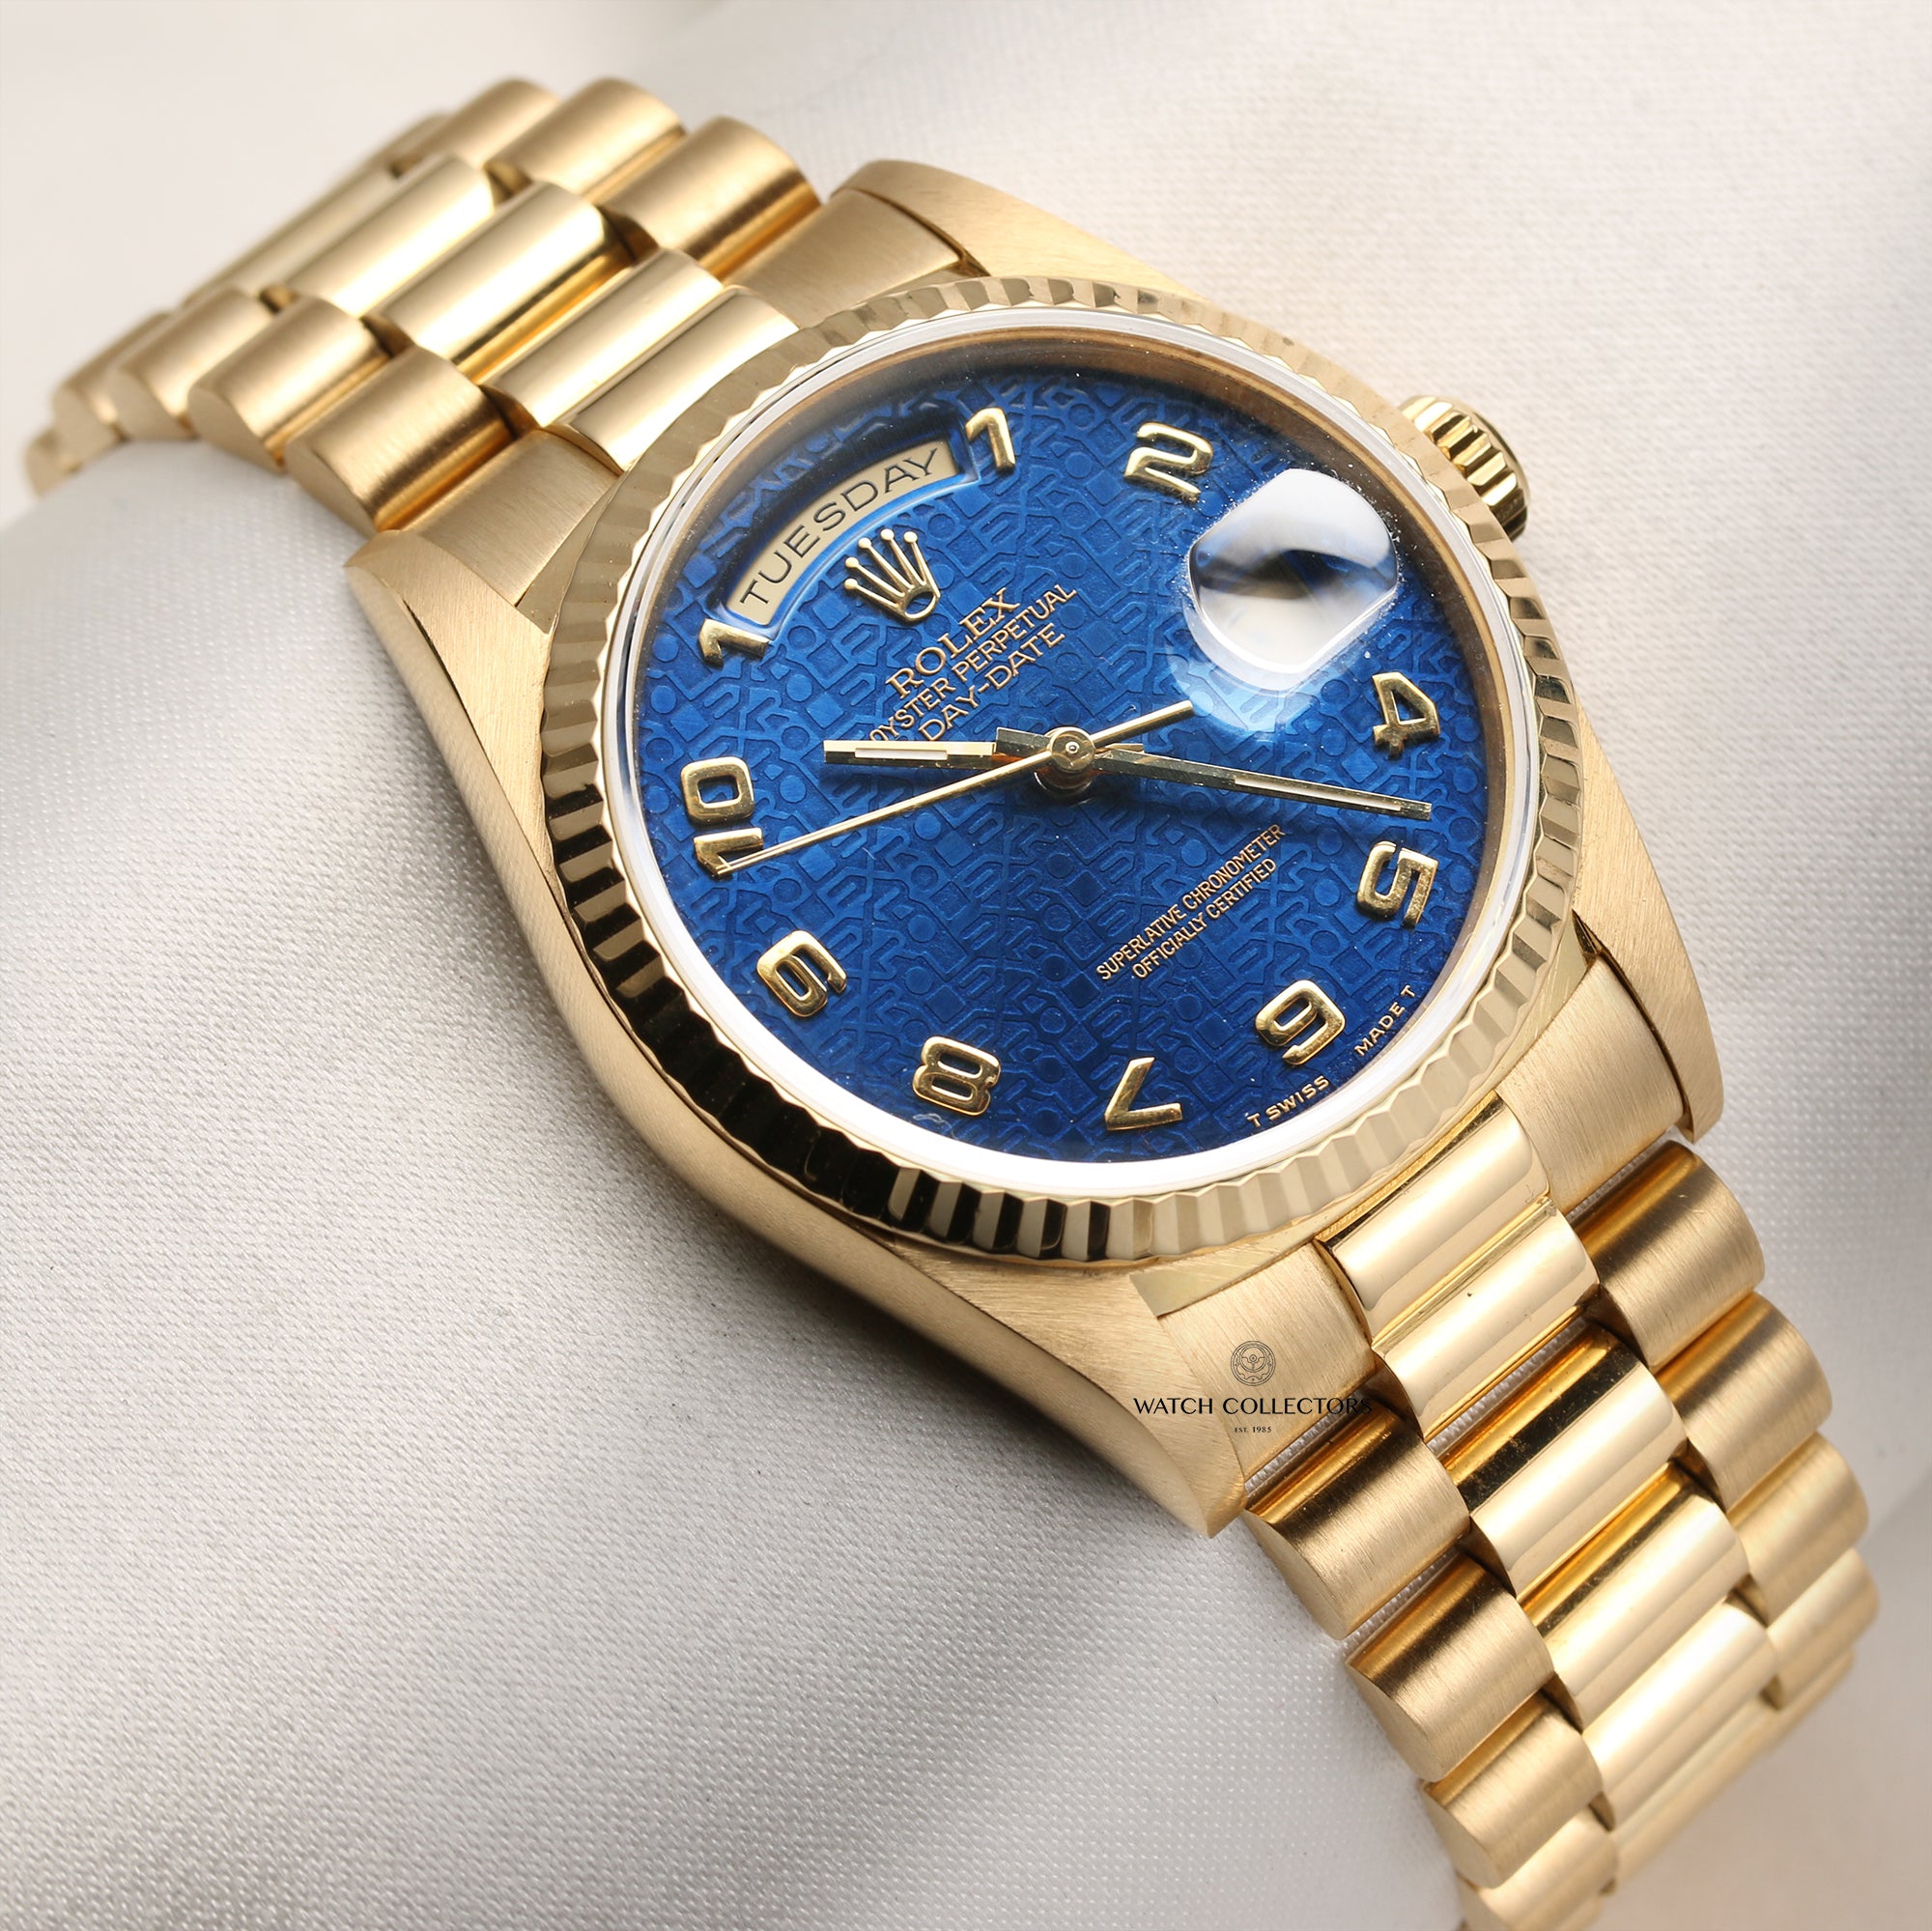 Rolex Day-Date 18238 Blue Jubilee Dial 18k Yellow Gold – Watch Collectors